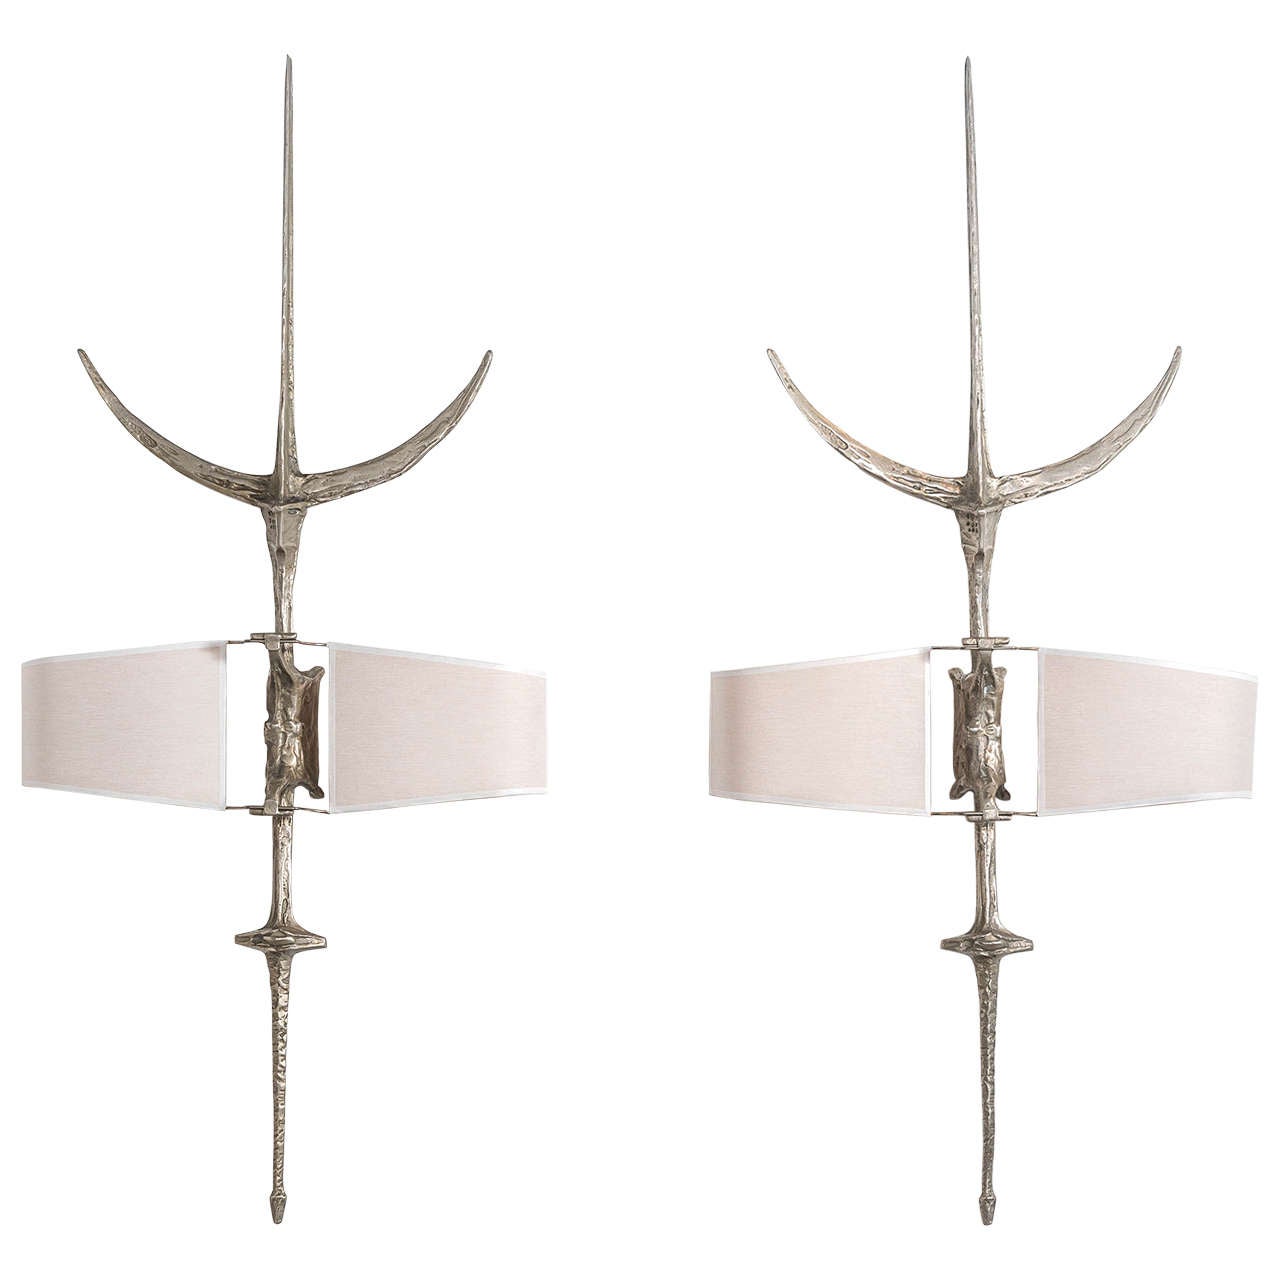 Felix AGOSTINI Rare Pair of Nickeled Bronze Sconces For Sale